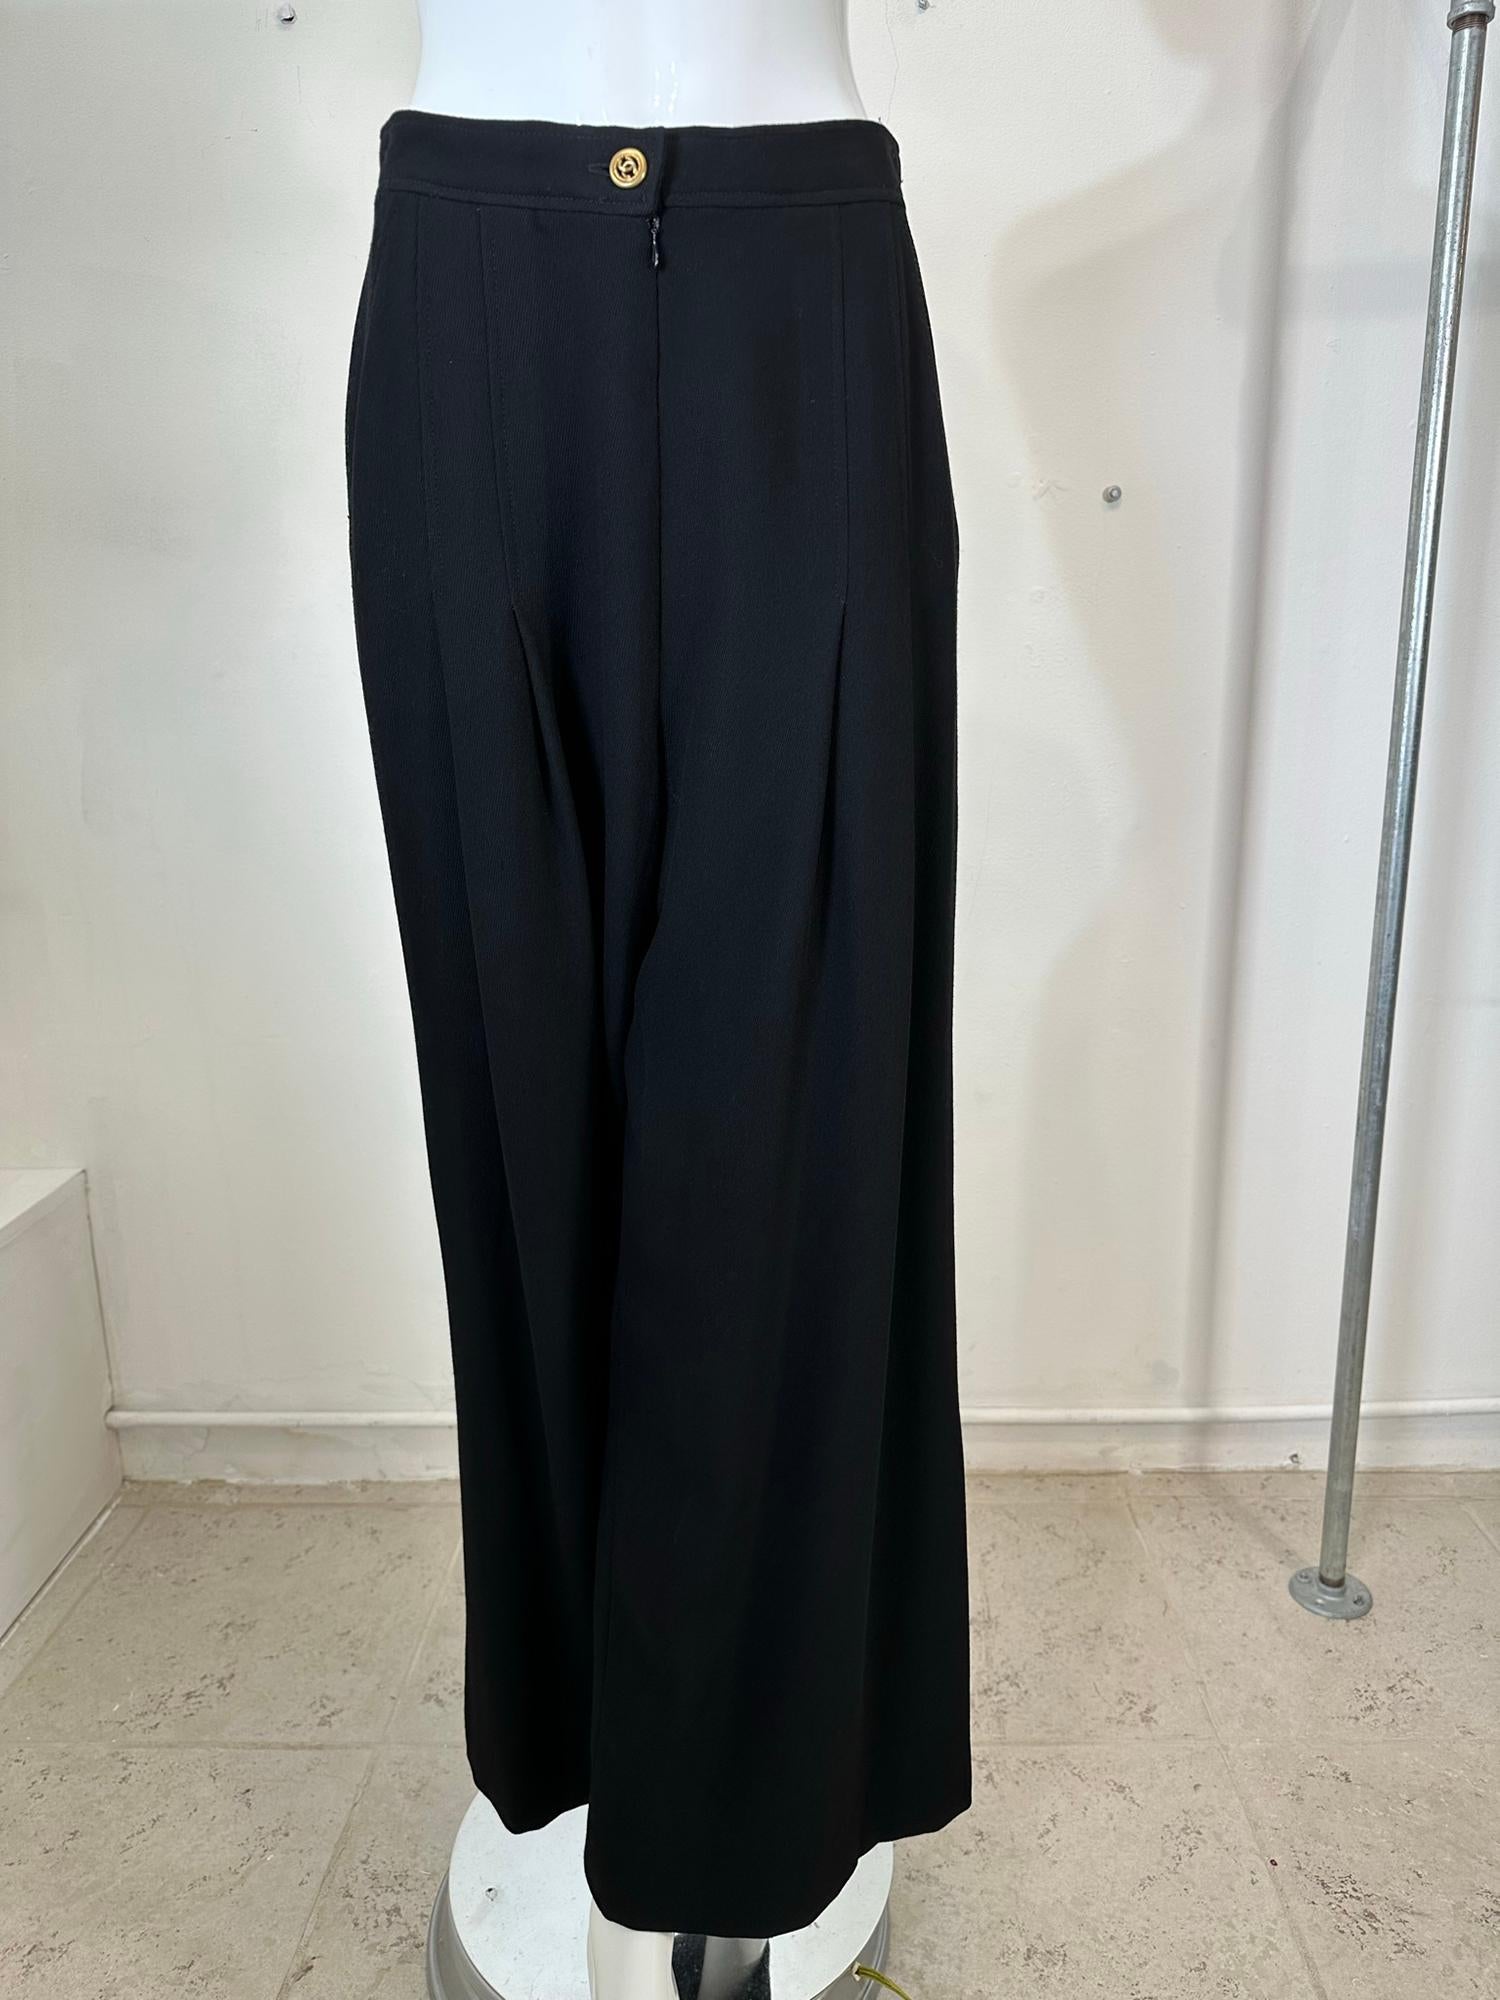 Chanel black wool twill high waist, fly front, gold Chanel logo button at waist band front. Pleated full wide leg trousers from 1995. Beautiful drape, classic 1940s influence man tailoring for women. Fully lined in silk. Fits like a size 6, check